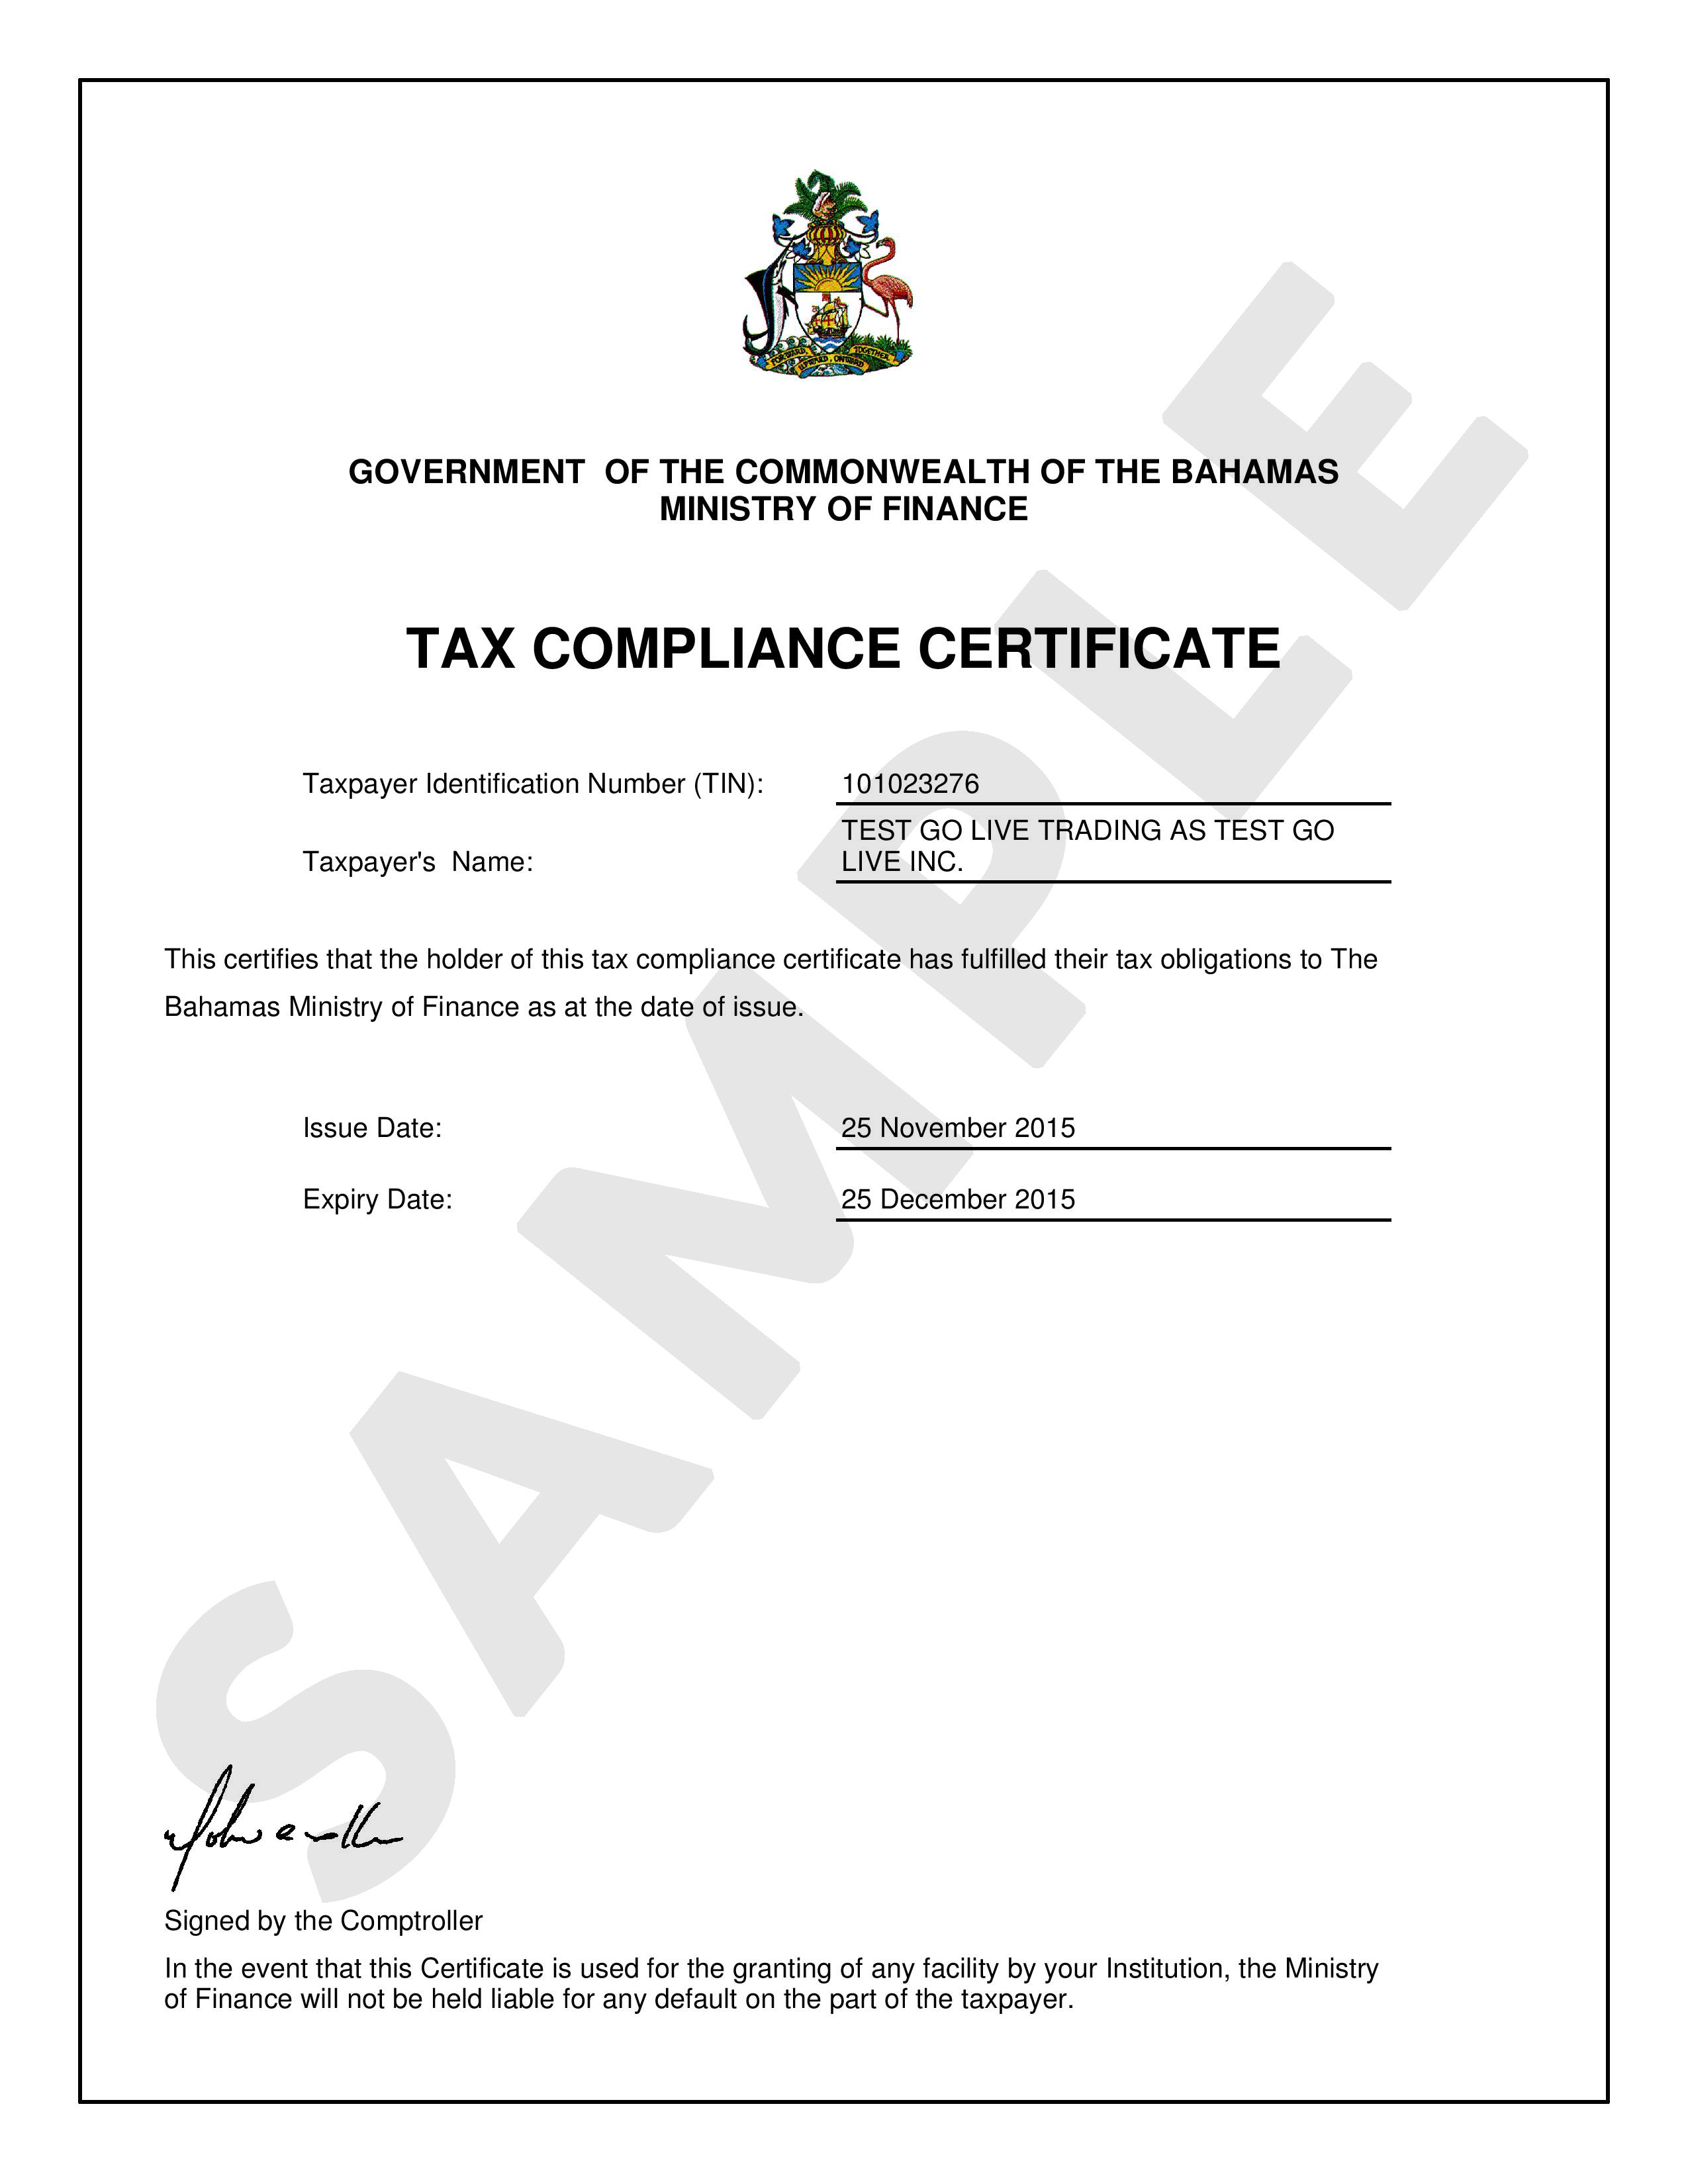 how-to-apply-for-tax-compliance-certificate-in-bahamas-electricity